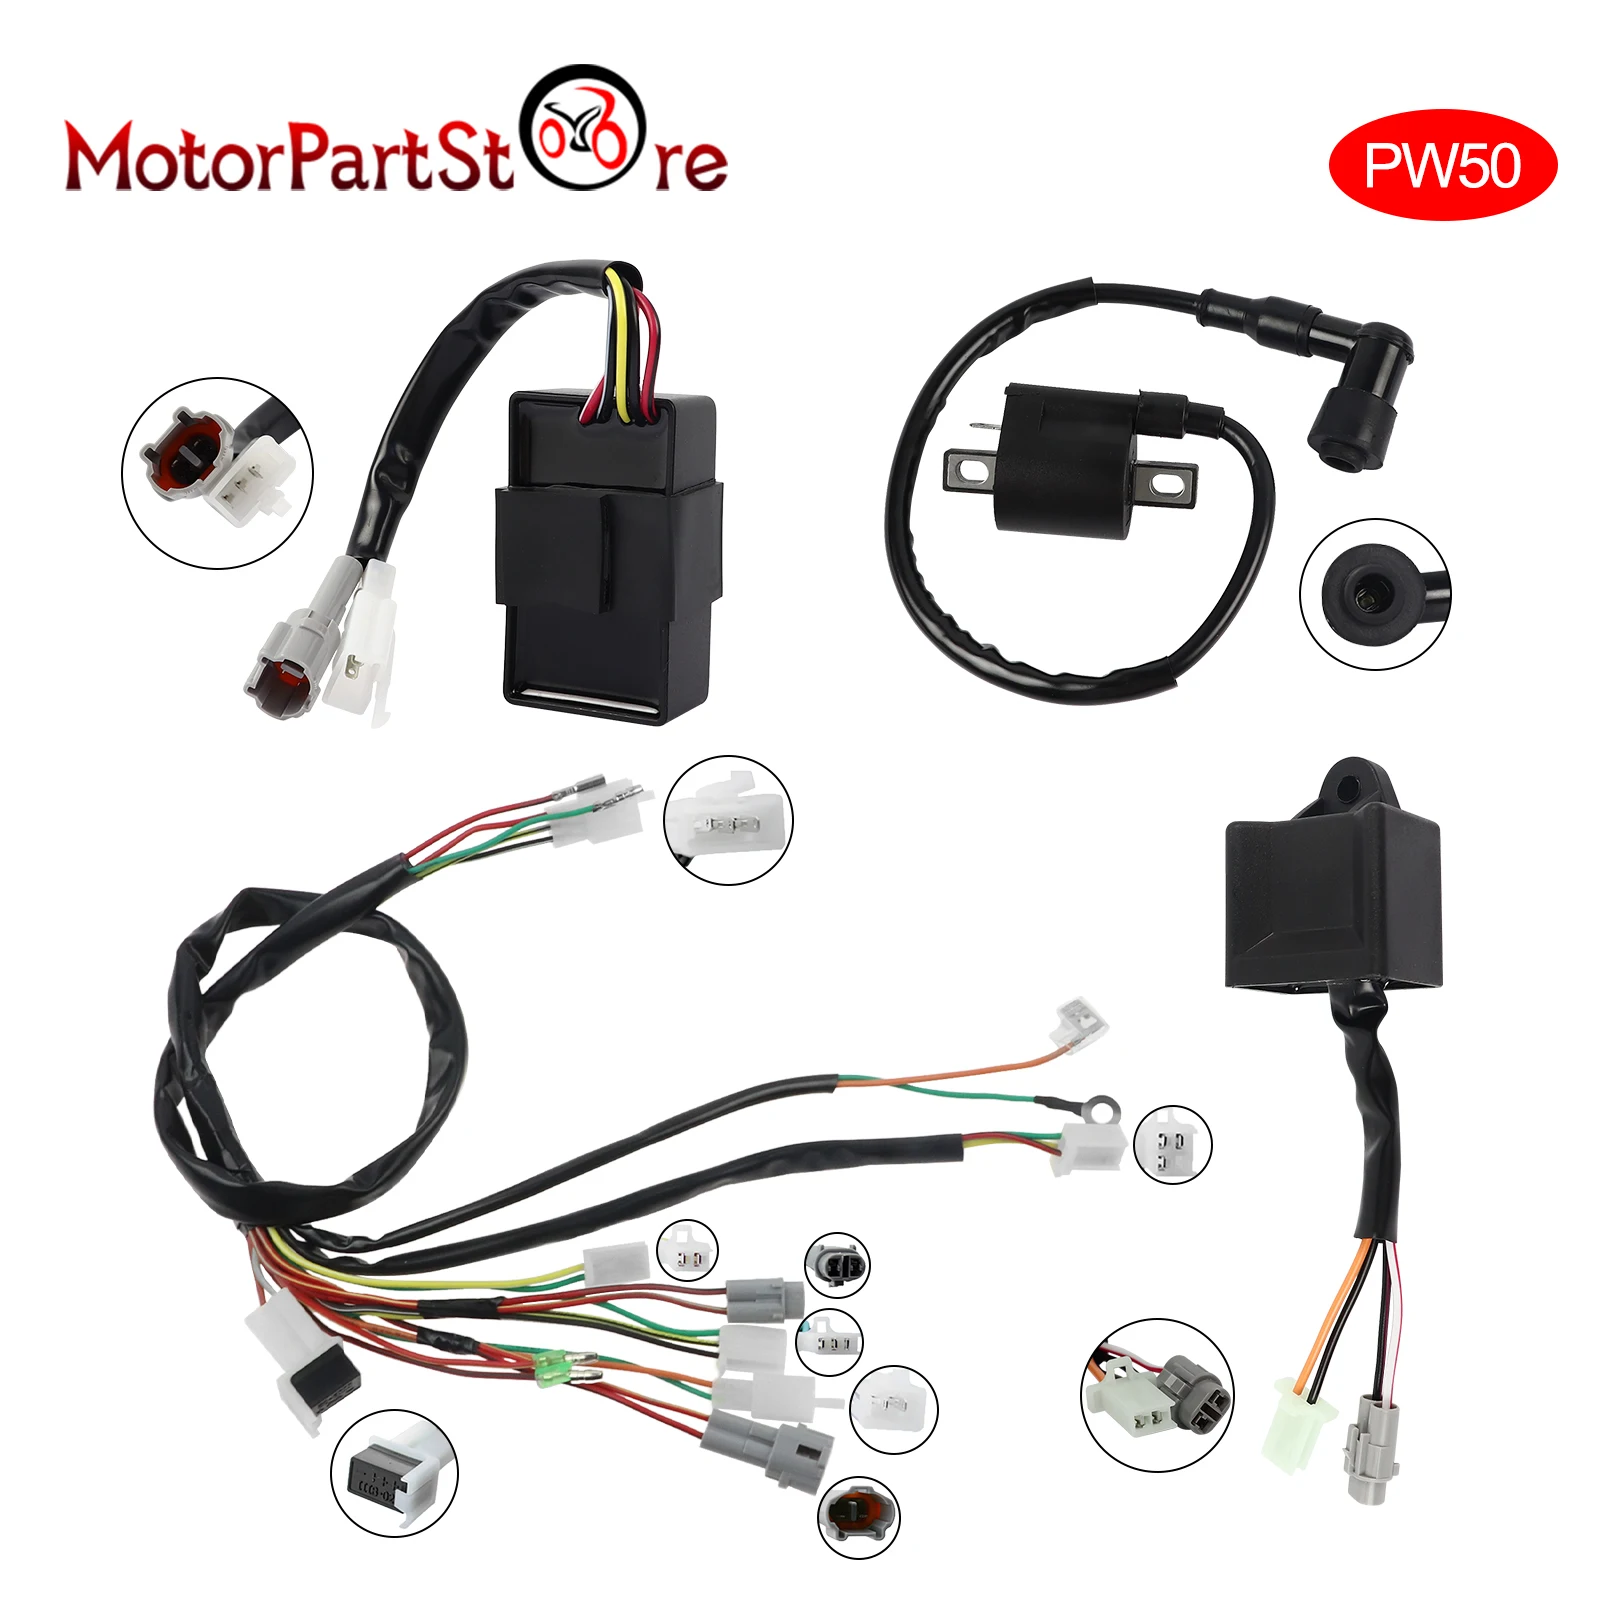 Enrilior Ignition Wiring Harness CDI Control Unit Coil Kit Fit Compatible with Y-a-m-a-h-a PW50 PY50 Dirt Bike 